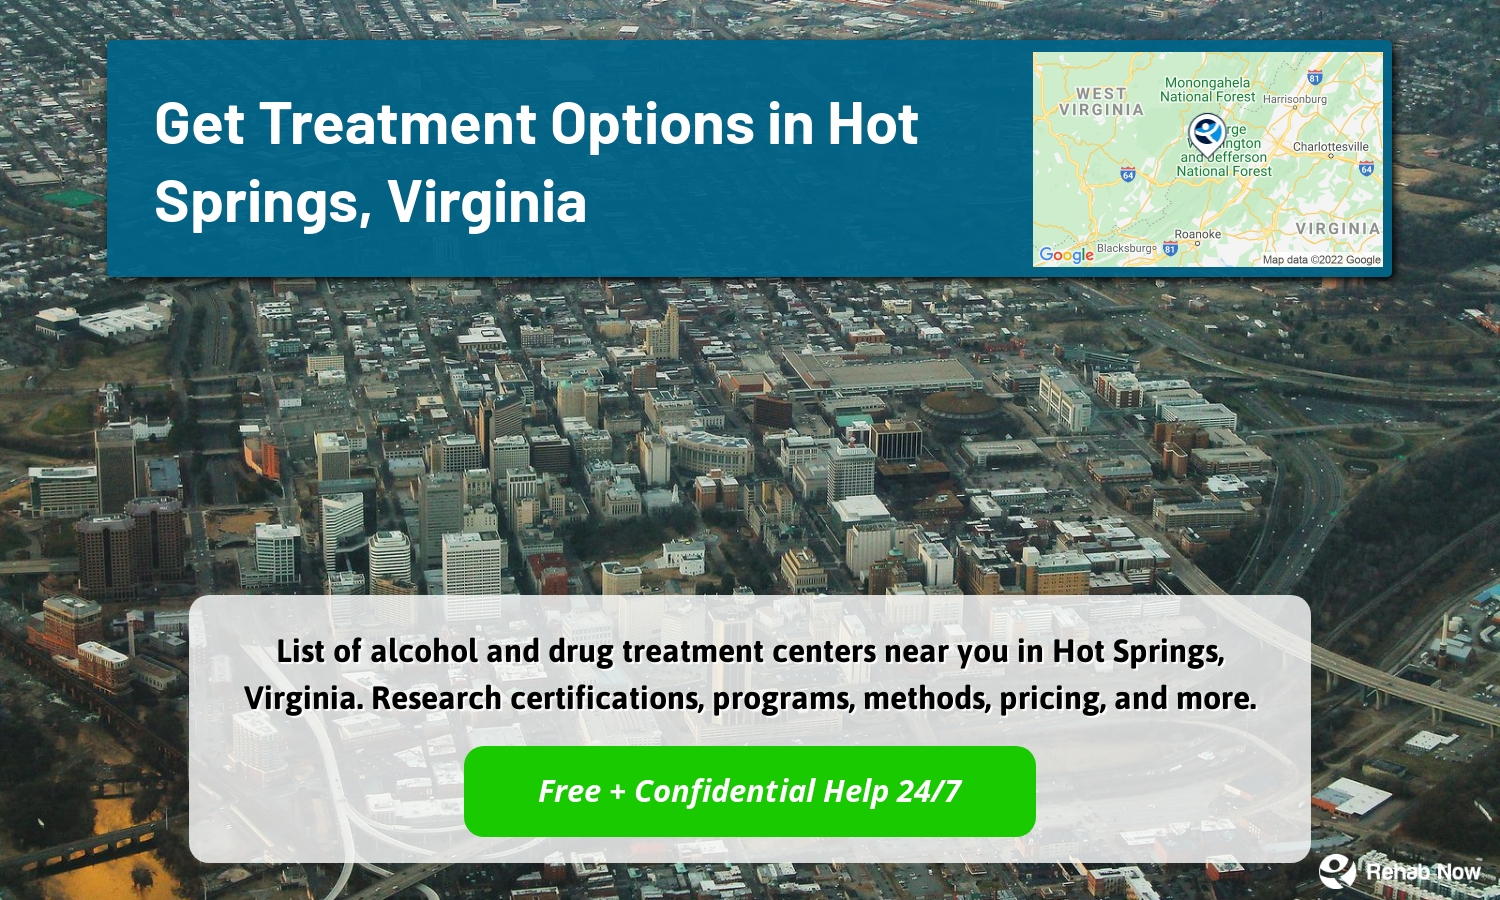 List of alcohol and drug treatment centers near you in Hot Springs, Virginia. Research certifications, programs, methods, pricing, and more.